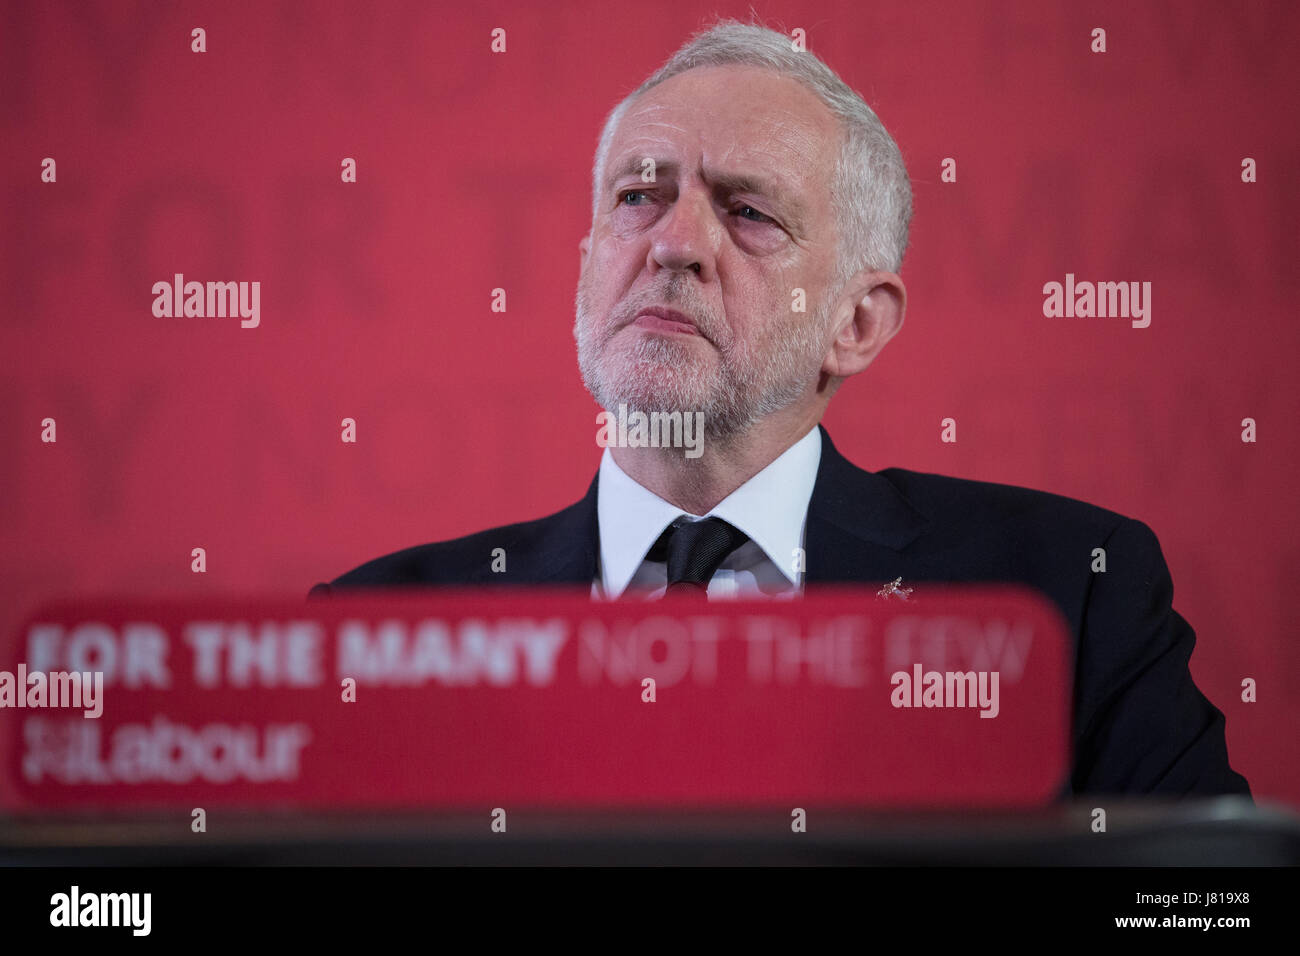 London, UK. 26th May, 2017. Labour Party leader Jeremy Corbyn delivers a speech in Westminster on defending democracy and the importance of standing together with the city of Manchester in the wake of the attack at Manchester Arena on 22nd May, his first major speech since campaigning was resumed. He also spoke of the link between terrorism in the UK and British foreign policy. Credit: Mark Kerrison/Alamy Live News Stock Photo